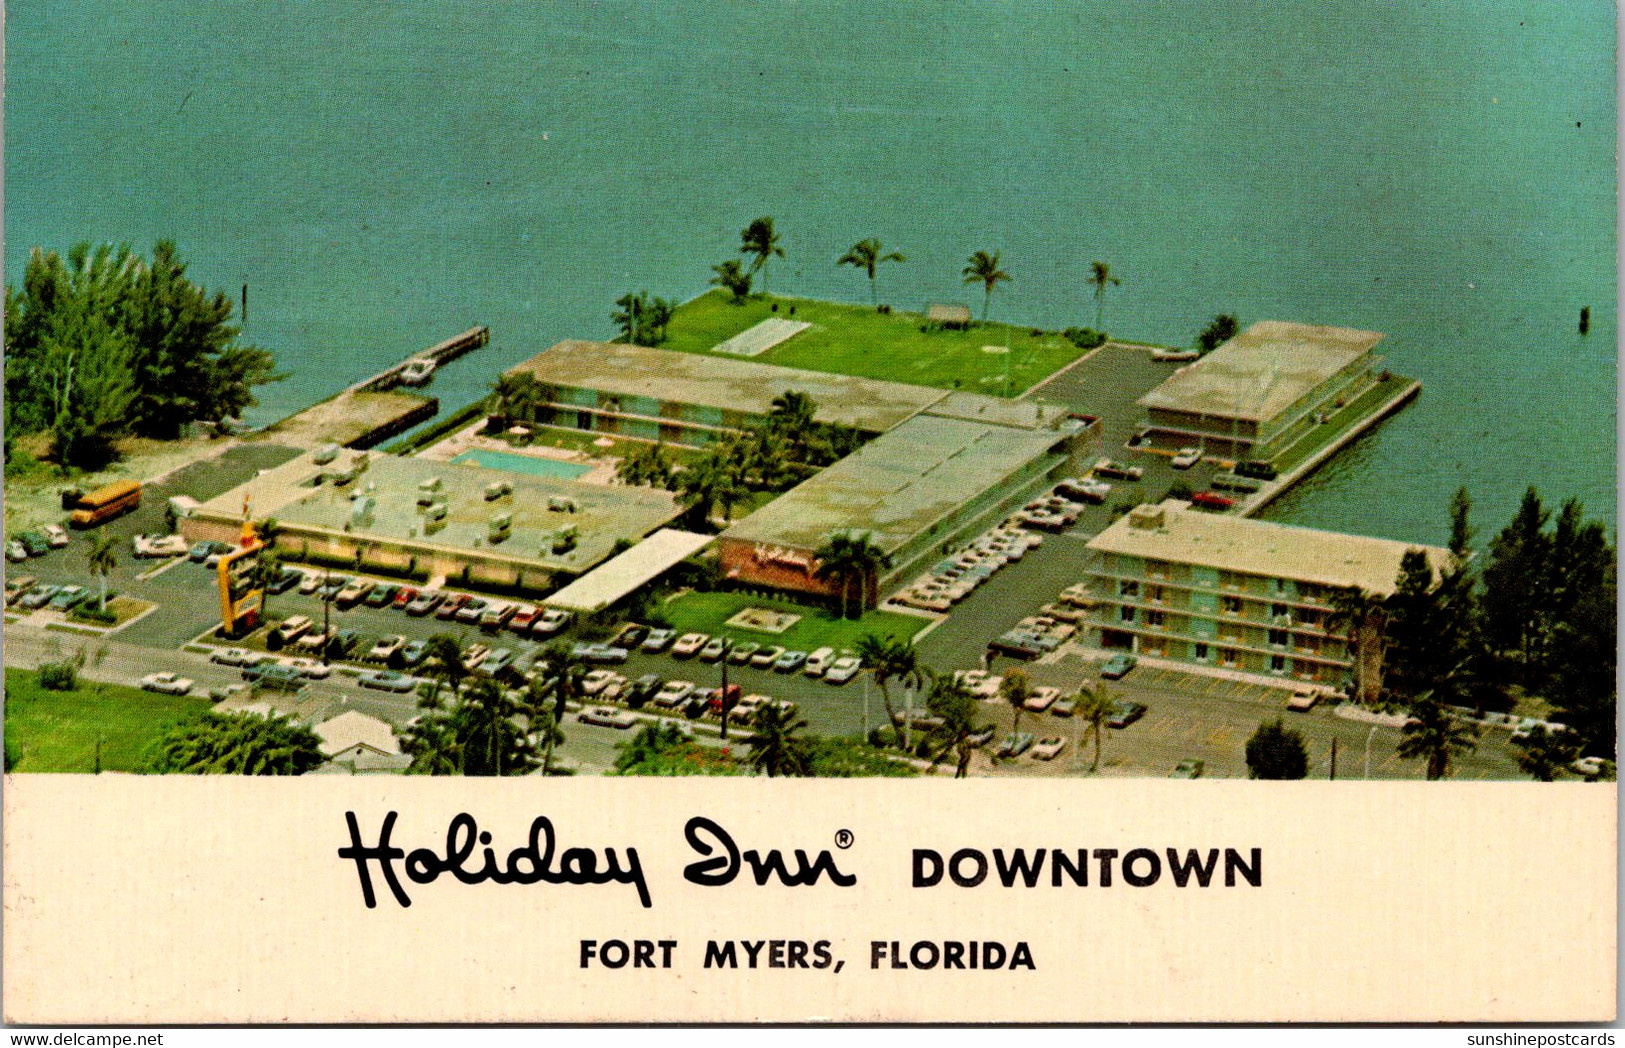 Holiday Inn Downtown Fort Myers Florida - Fort Myers